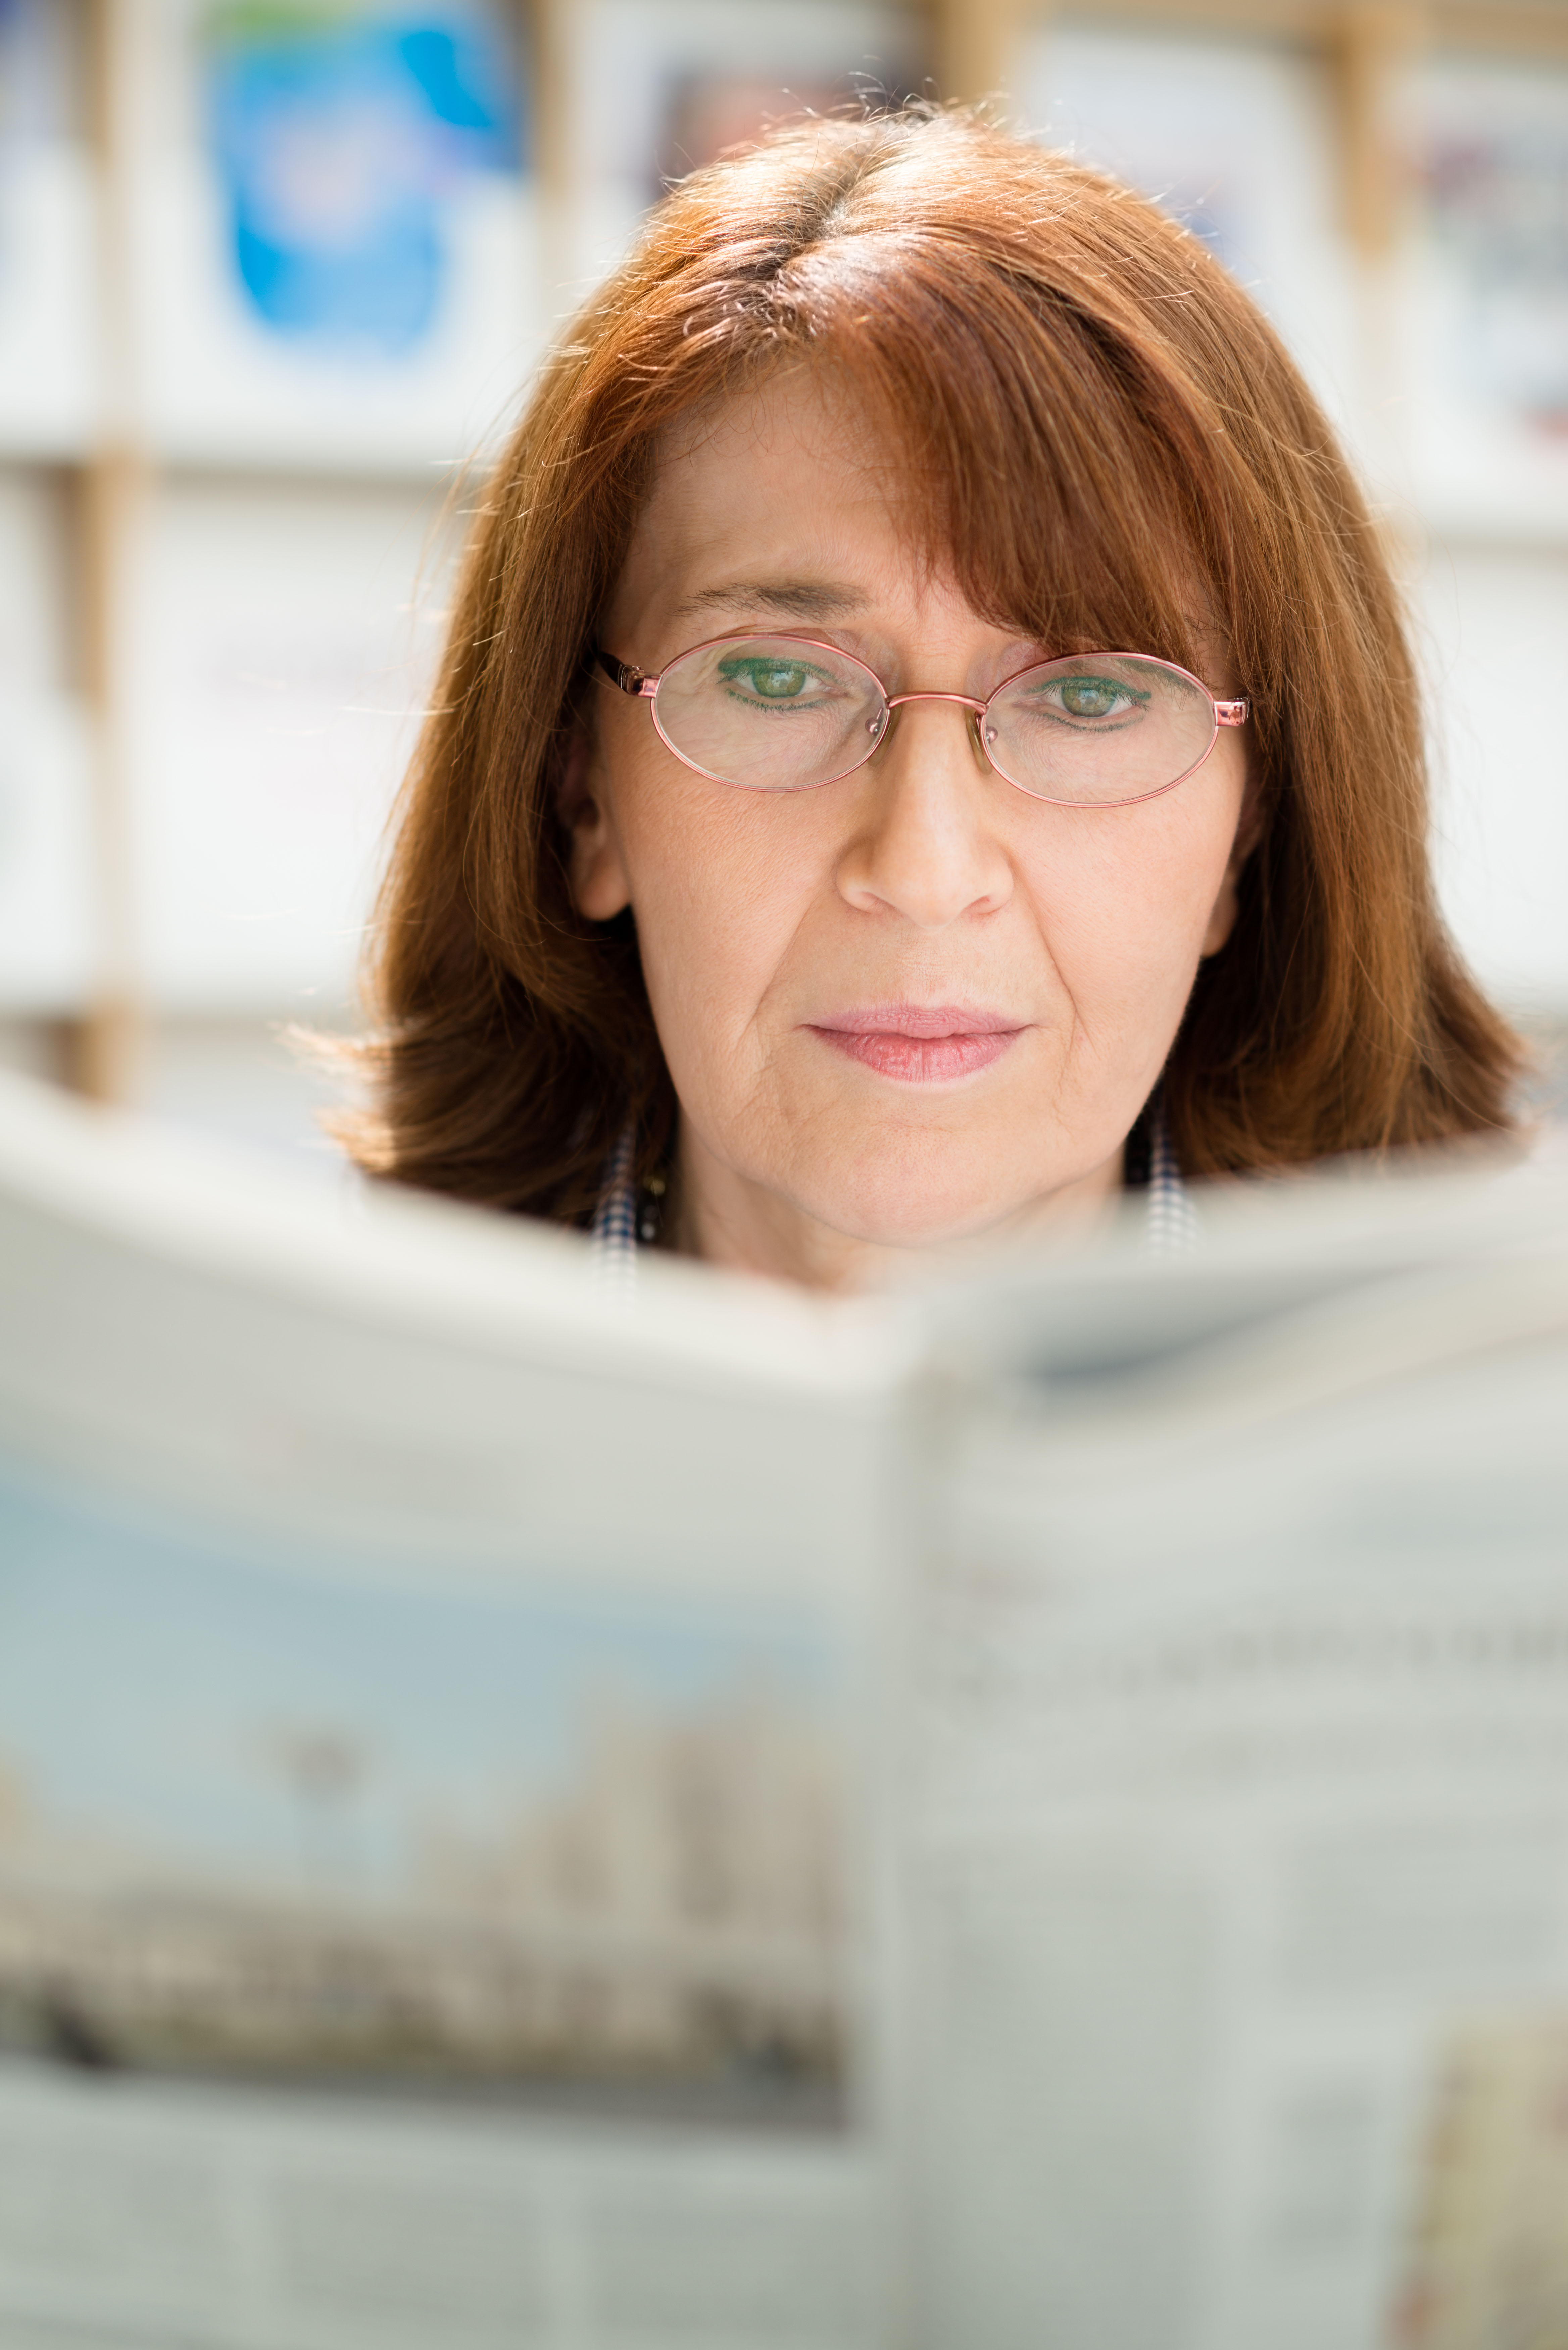 Portrait of middle aged woman with eyeglasses reading newspaper 